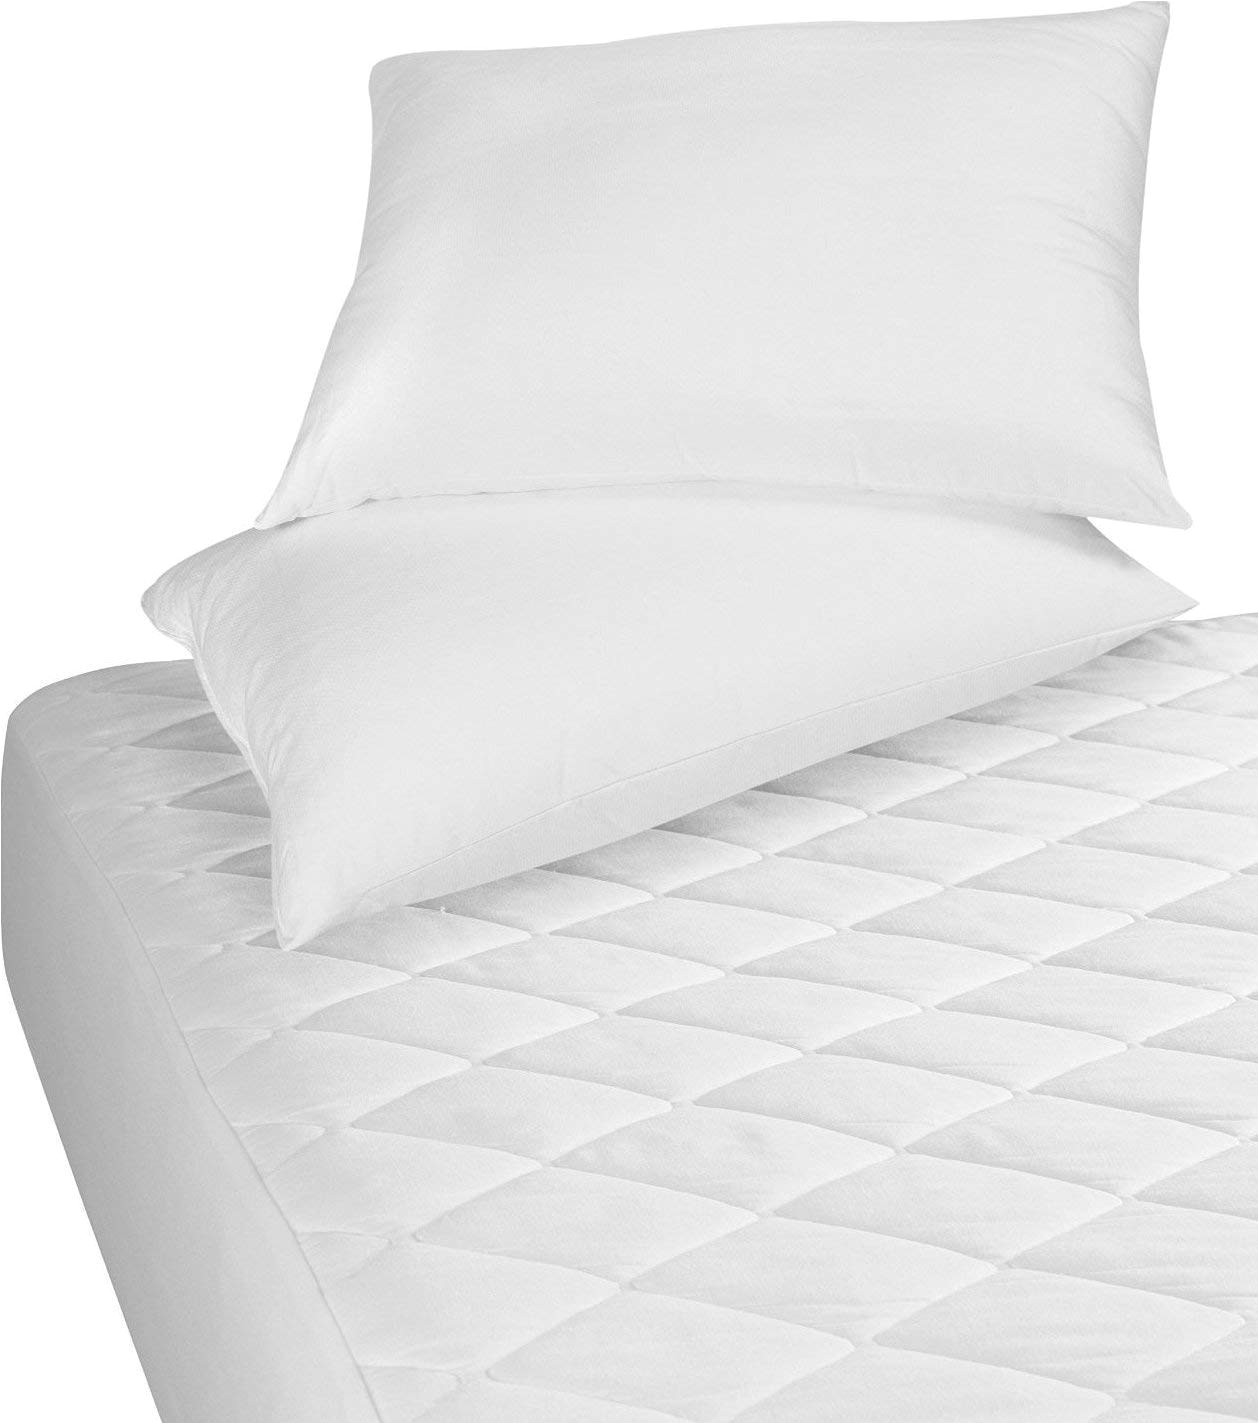 amazon com utopia bedding quilted fitted mattress pad full mattress cover stretches up to 16 inches deep mattress topper home kitchen